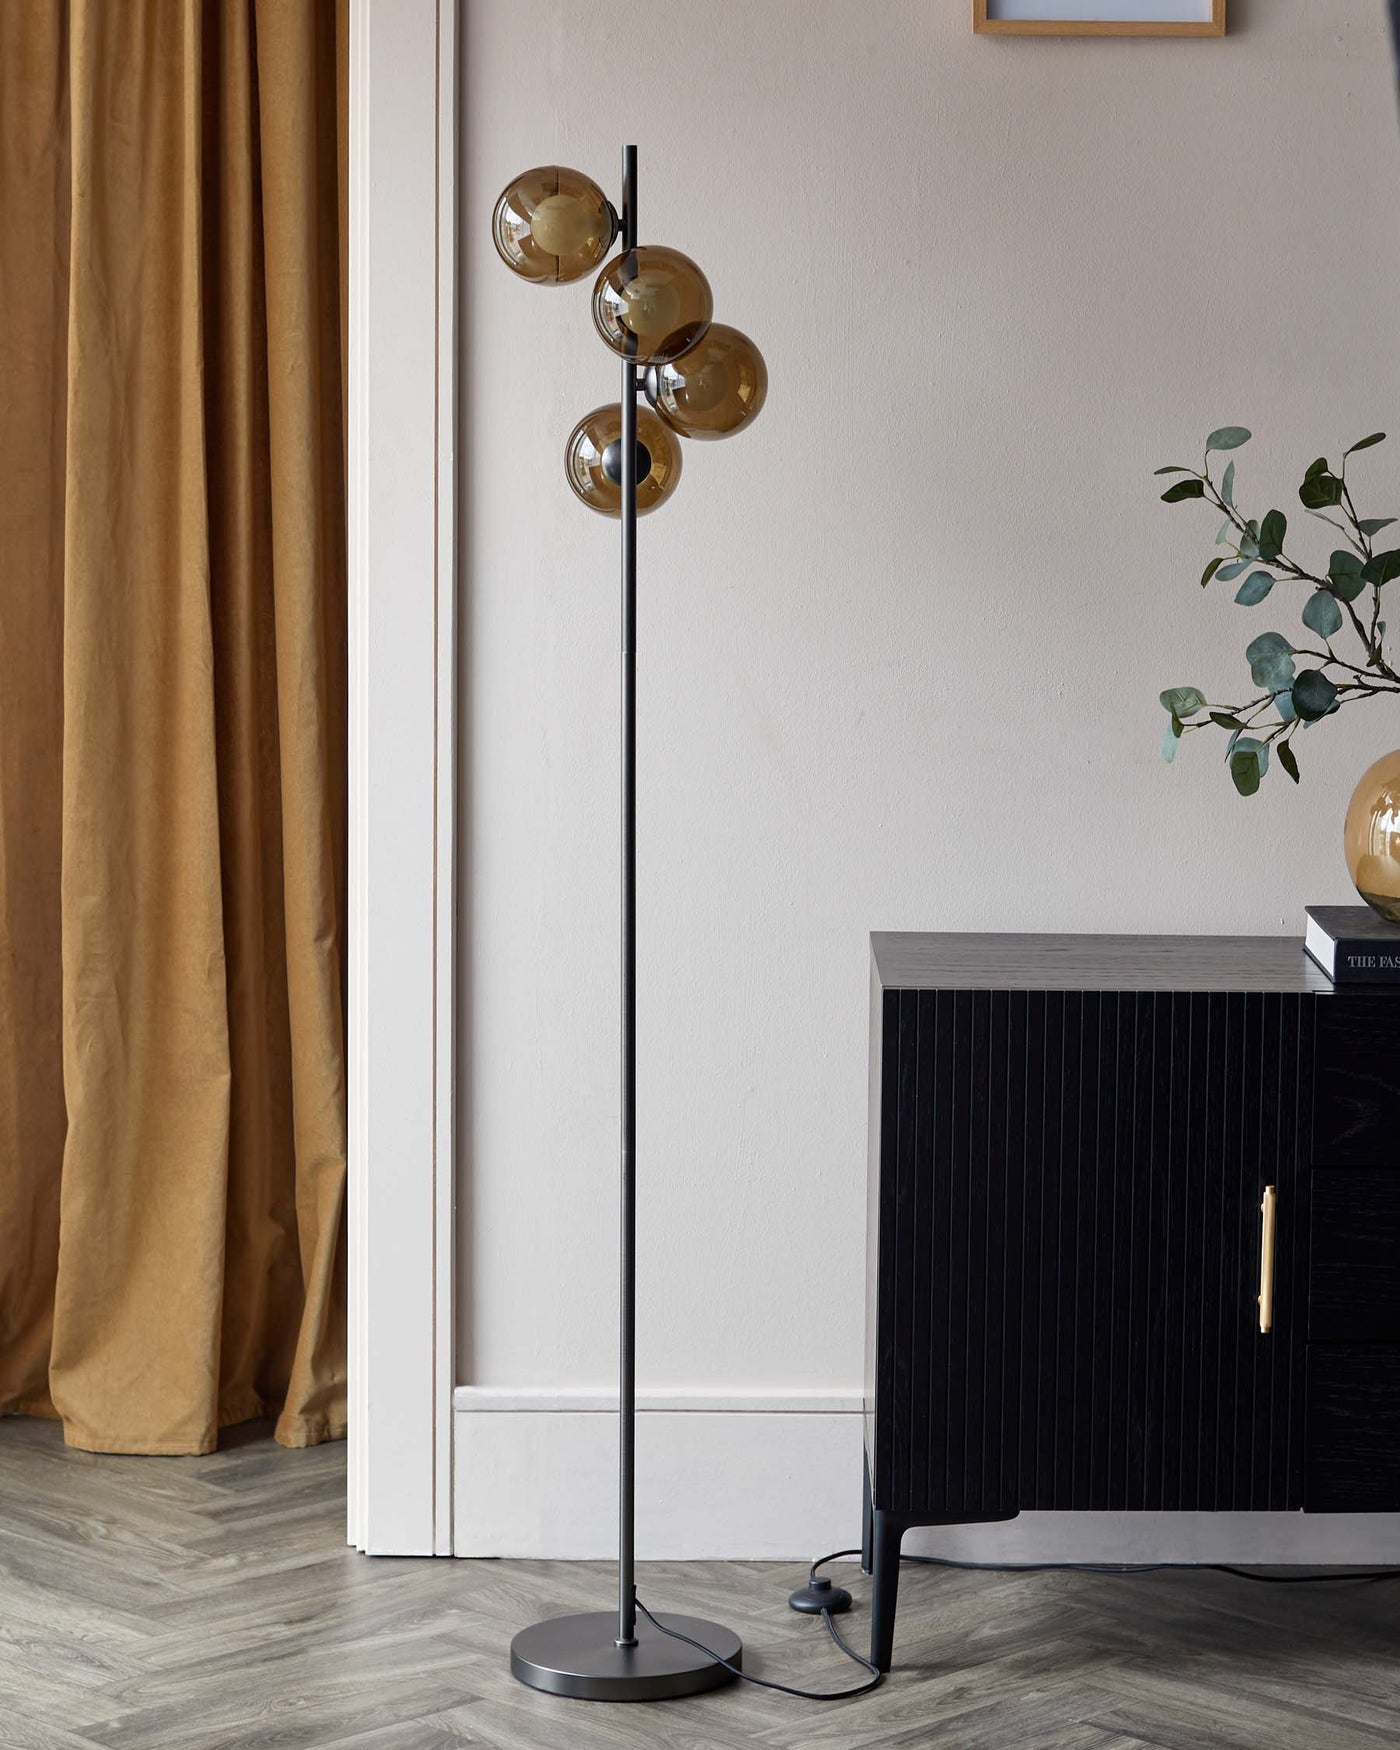 Modern black floor lamp with four globe-shaped amber glass shades positioned at various angles on a central column, paired with a contemporary black ribbed cabinet featuring an elegant brass handle.

Please note that while the image includes a floor lamp, which could be considered a lighting fixture rather than furniture, it is described because it complements the furniture item, the cabinet, in the setting.